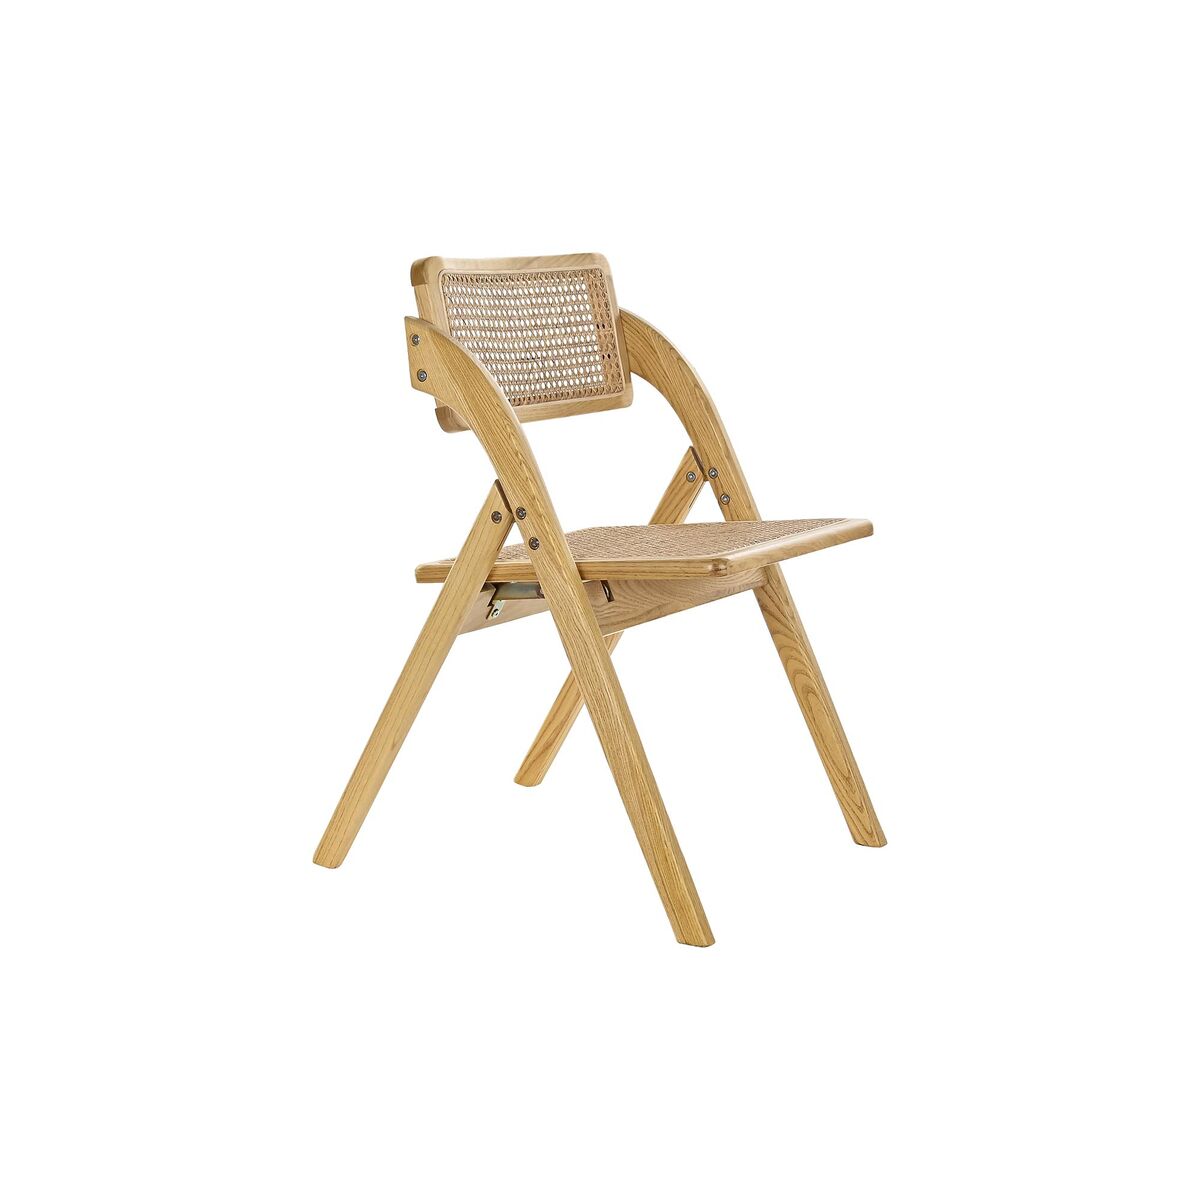 Folding Dining Chair in Wood and Rattan (53 x 60 x 79 cm)